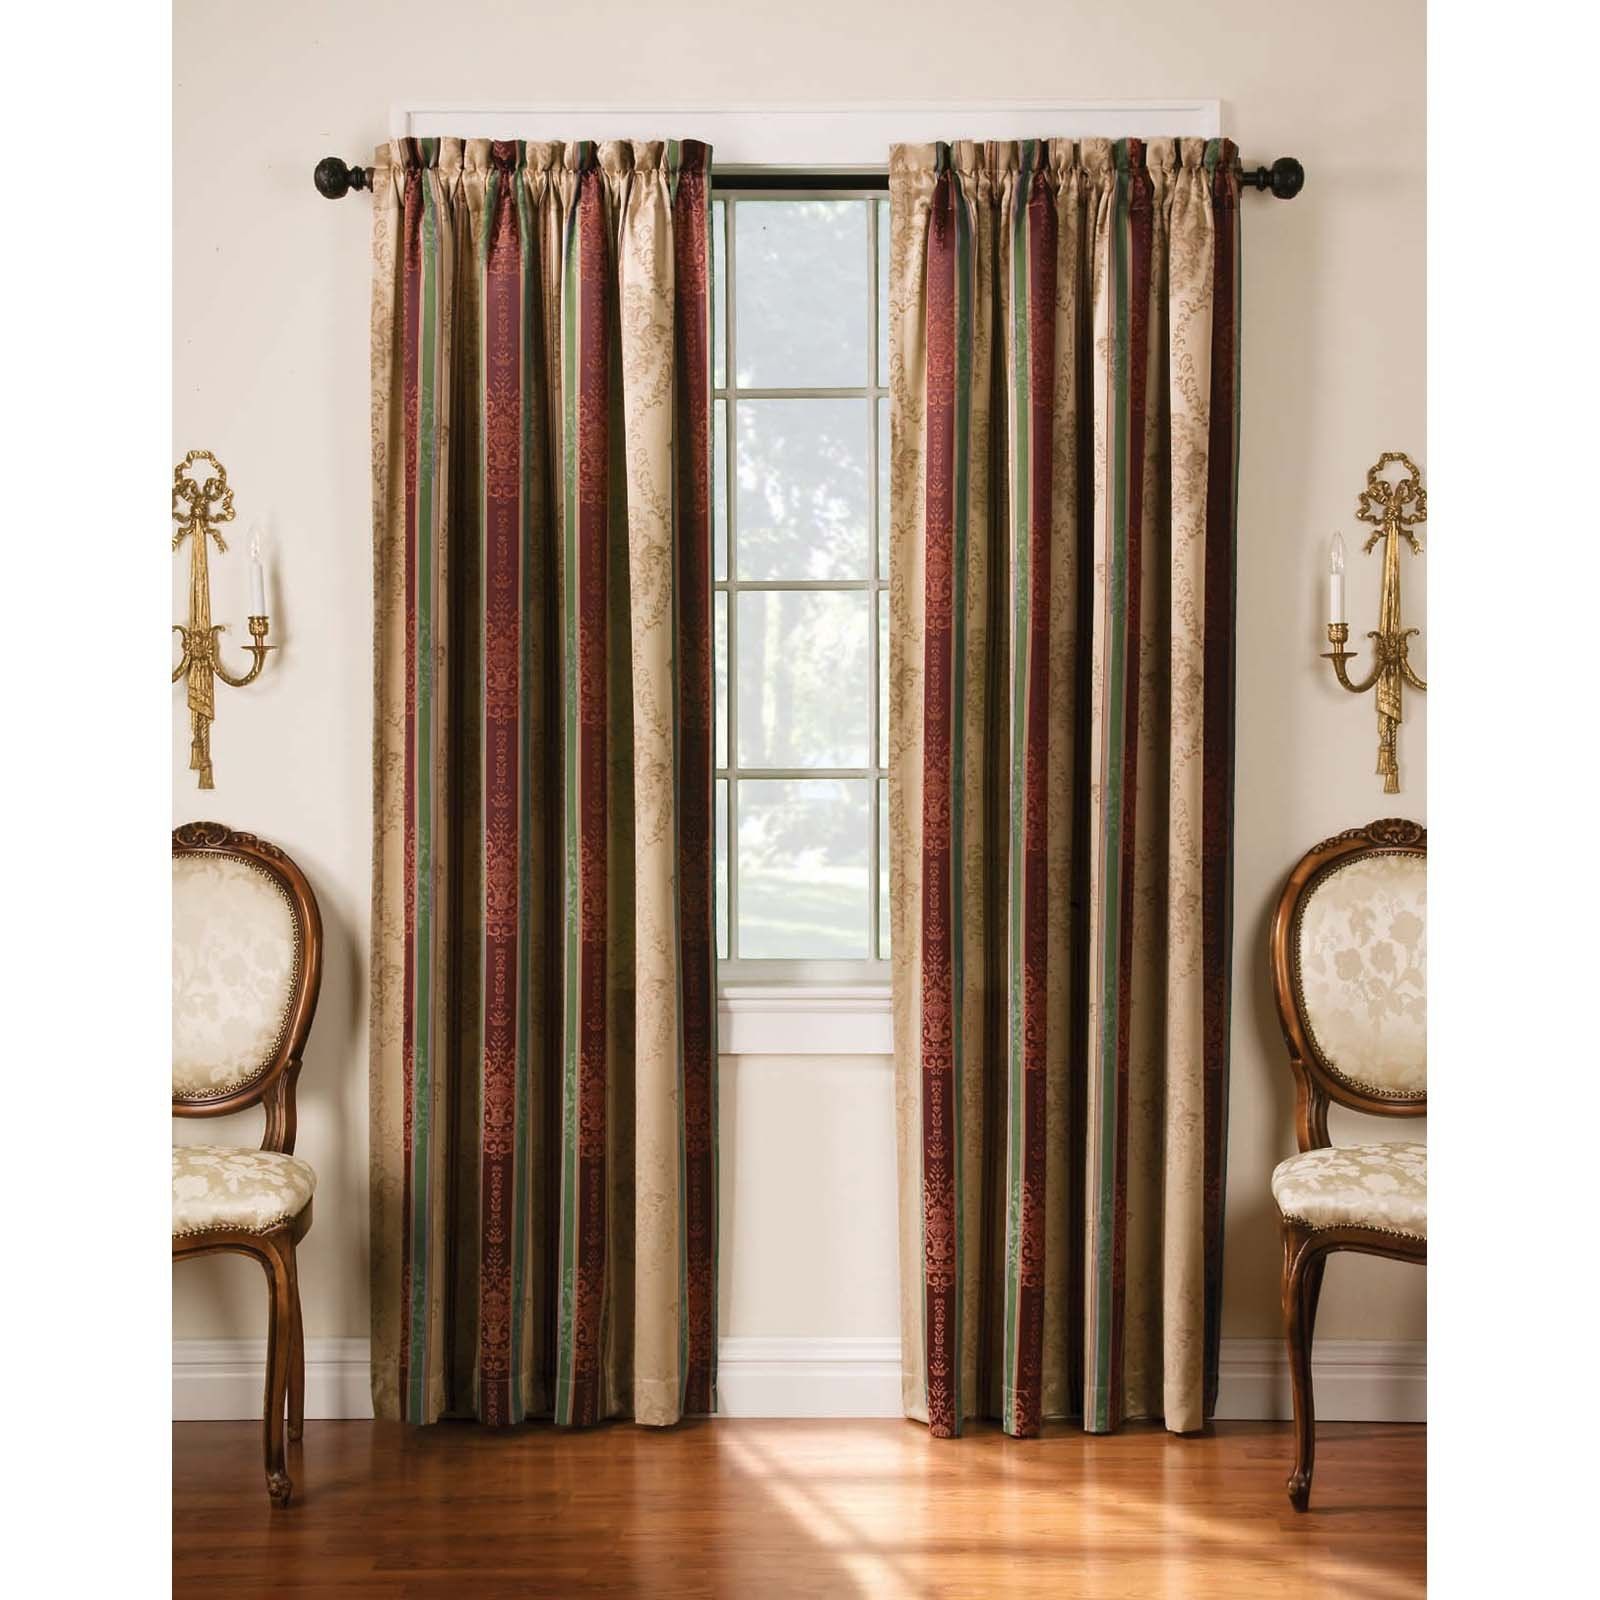 91 95 Inch Curtains On Hayneedle Curtain Panels 91 94 Inches Long In 92 Inches Long Curtains (View 11 of 25)